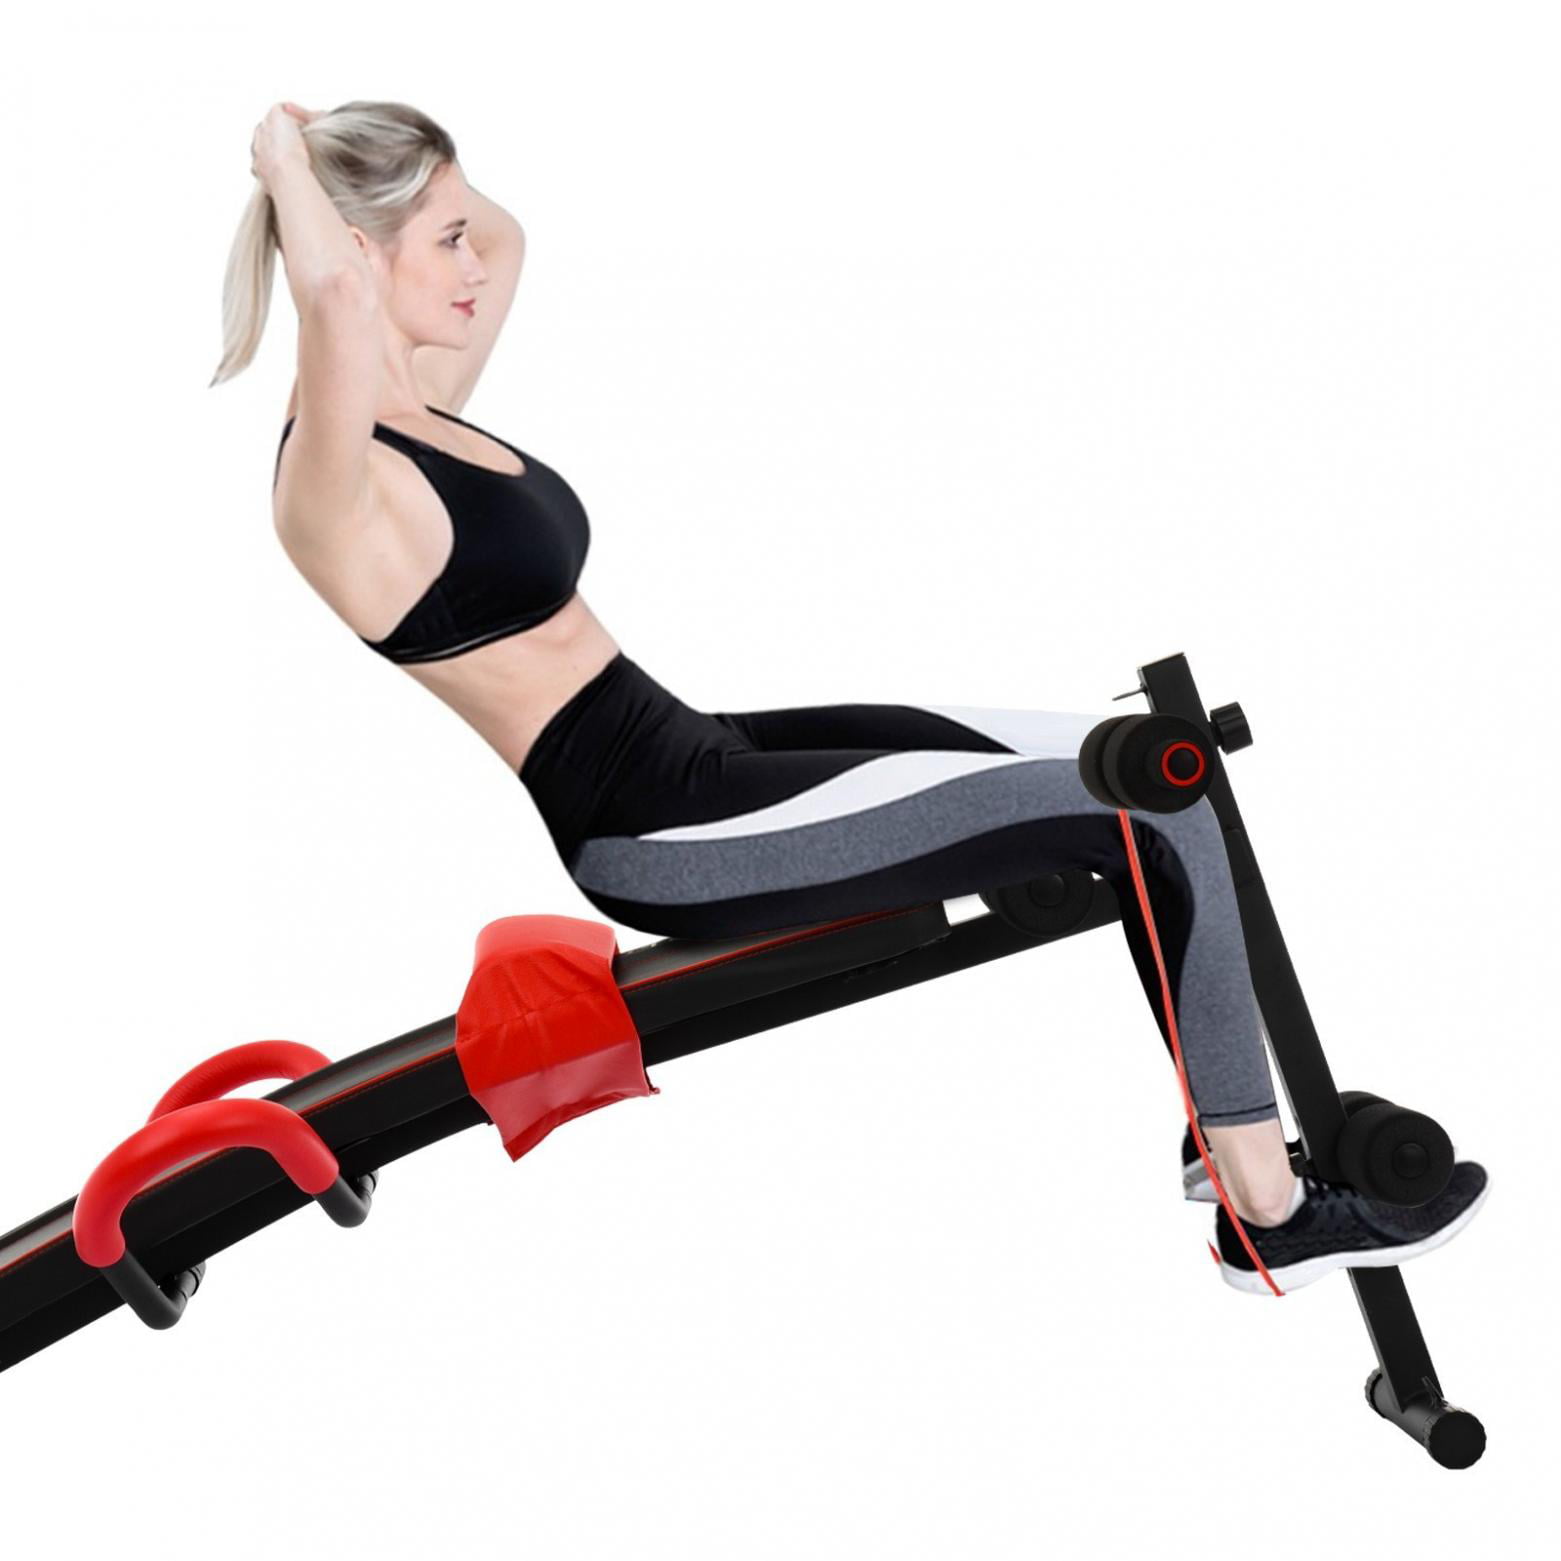 Details about   Folding Free Weight Training Weight Bench Abdominal training Sit Up Bench US 